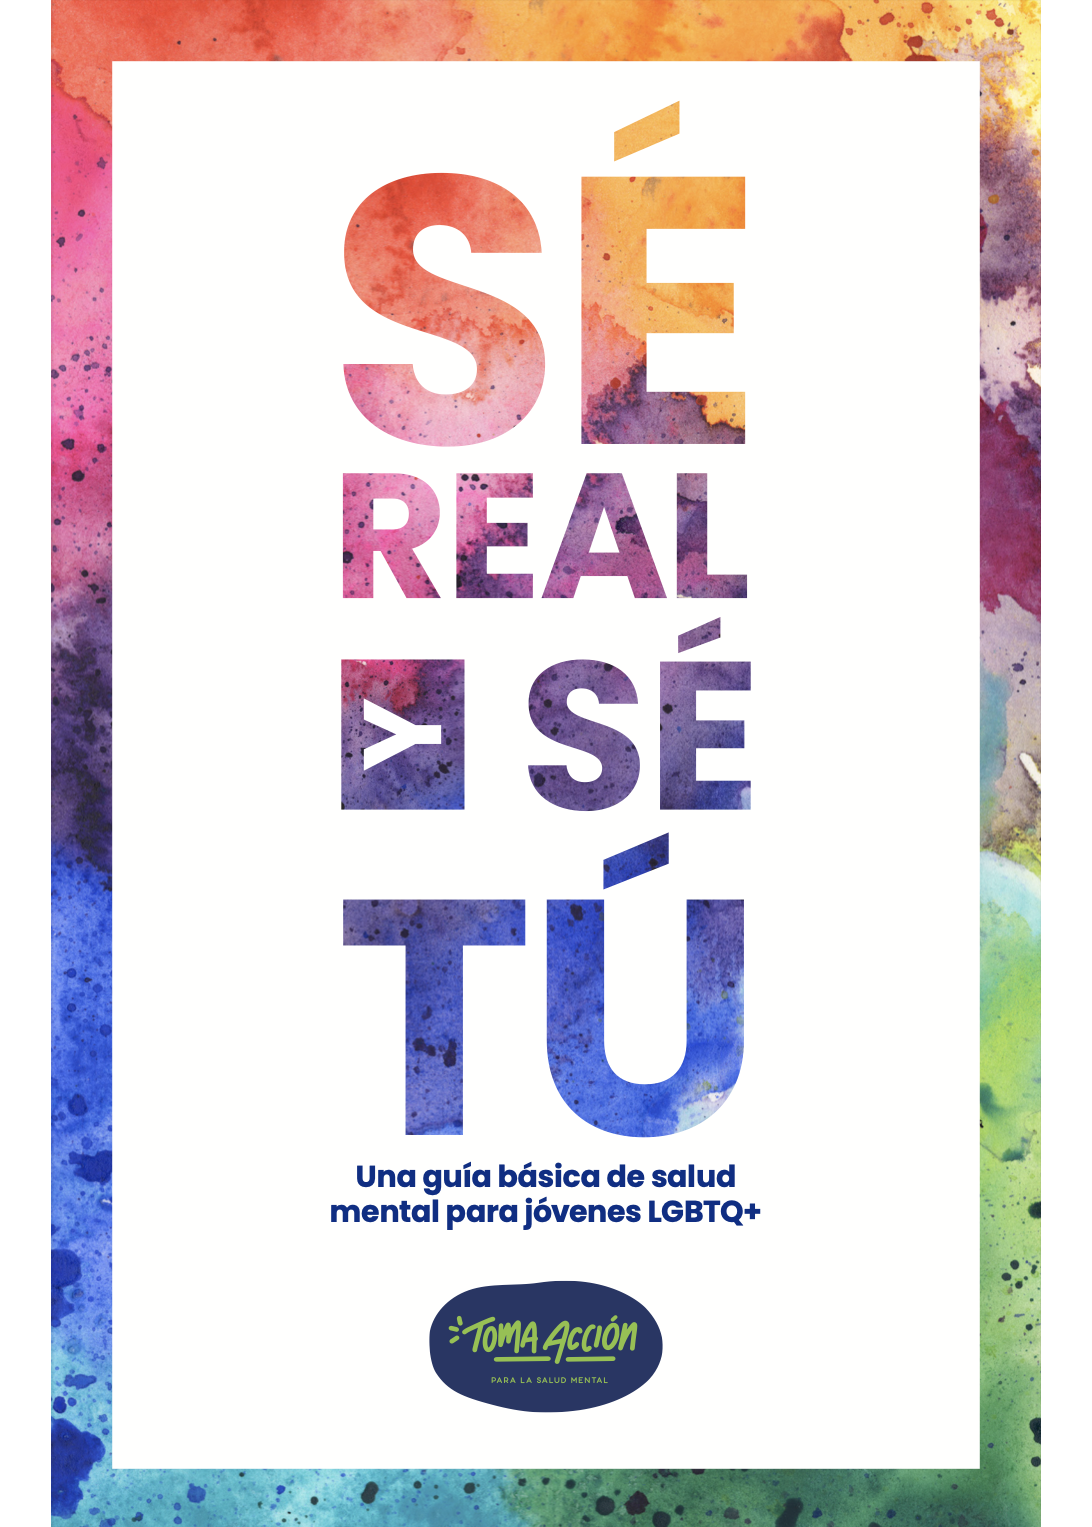 Be True and Be You - LGBTQ+ Booklet